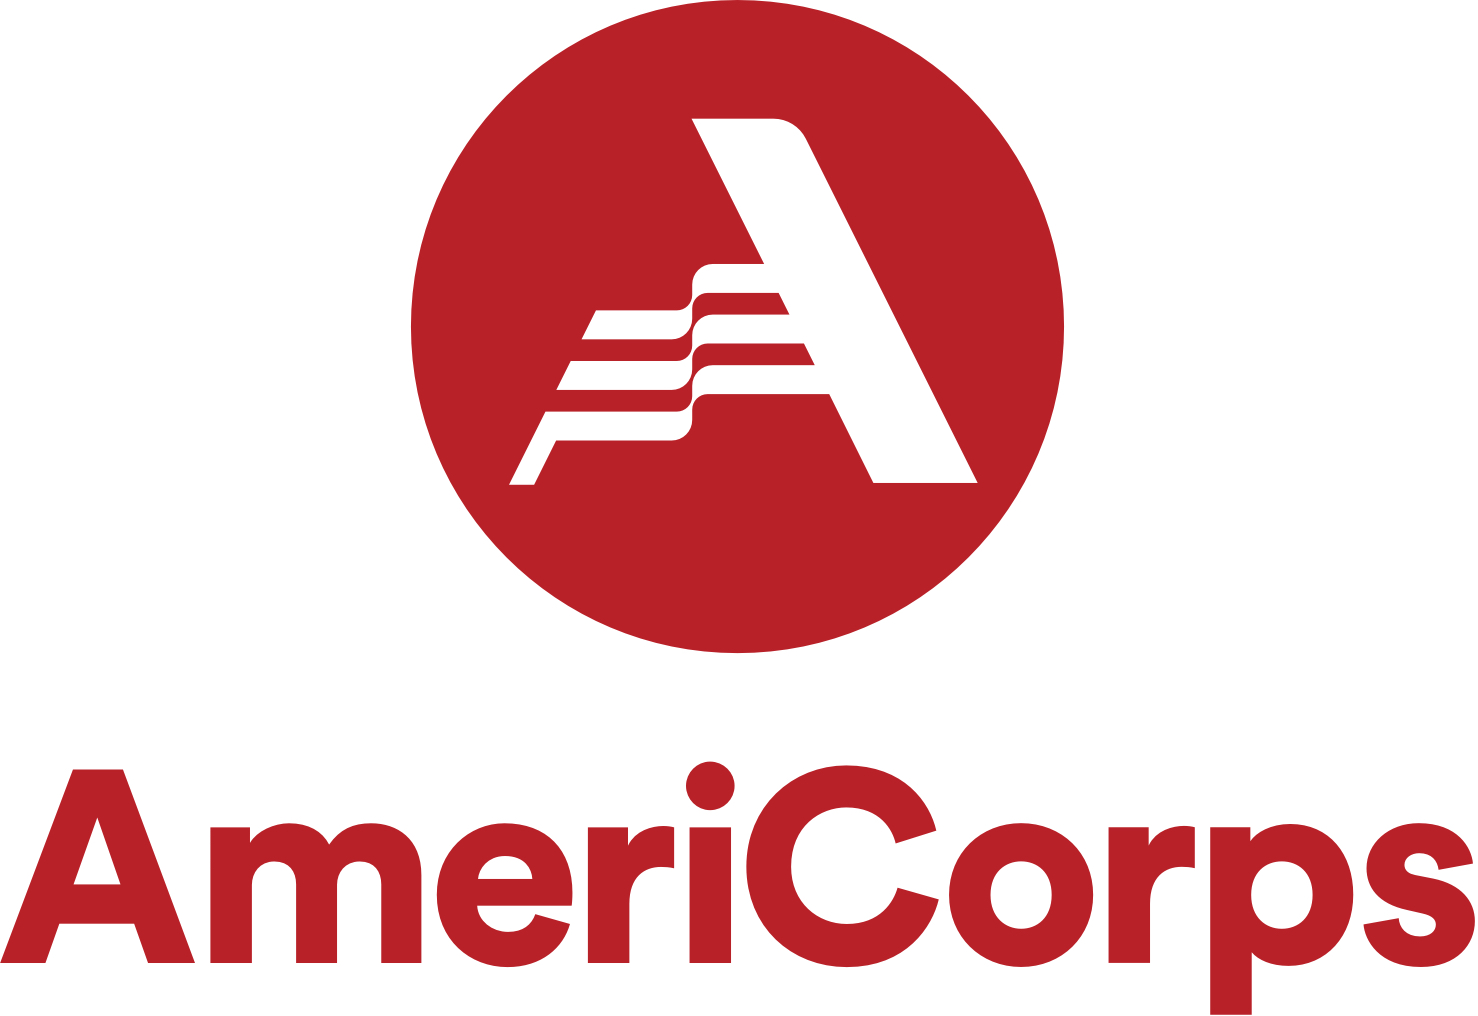 Red stylized letter A over the word AmeriCorps